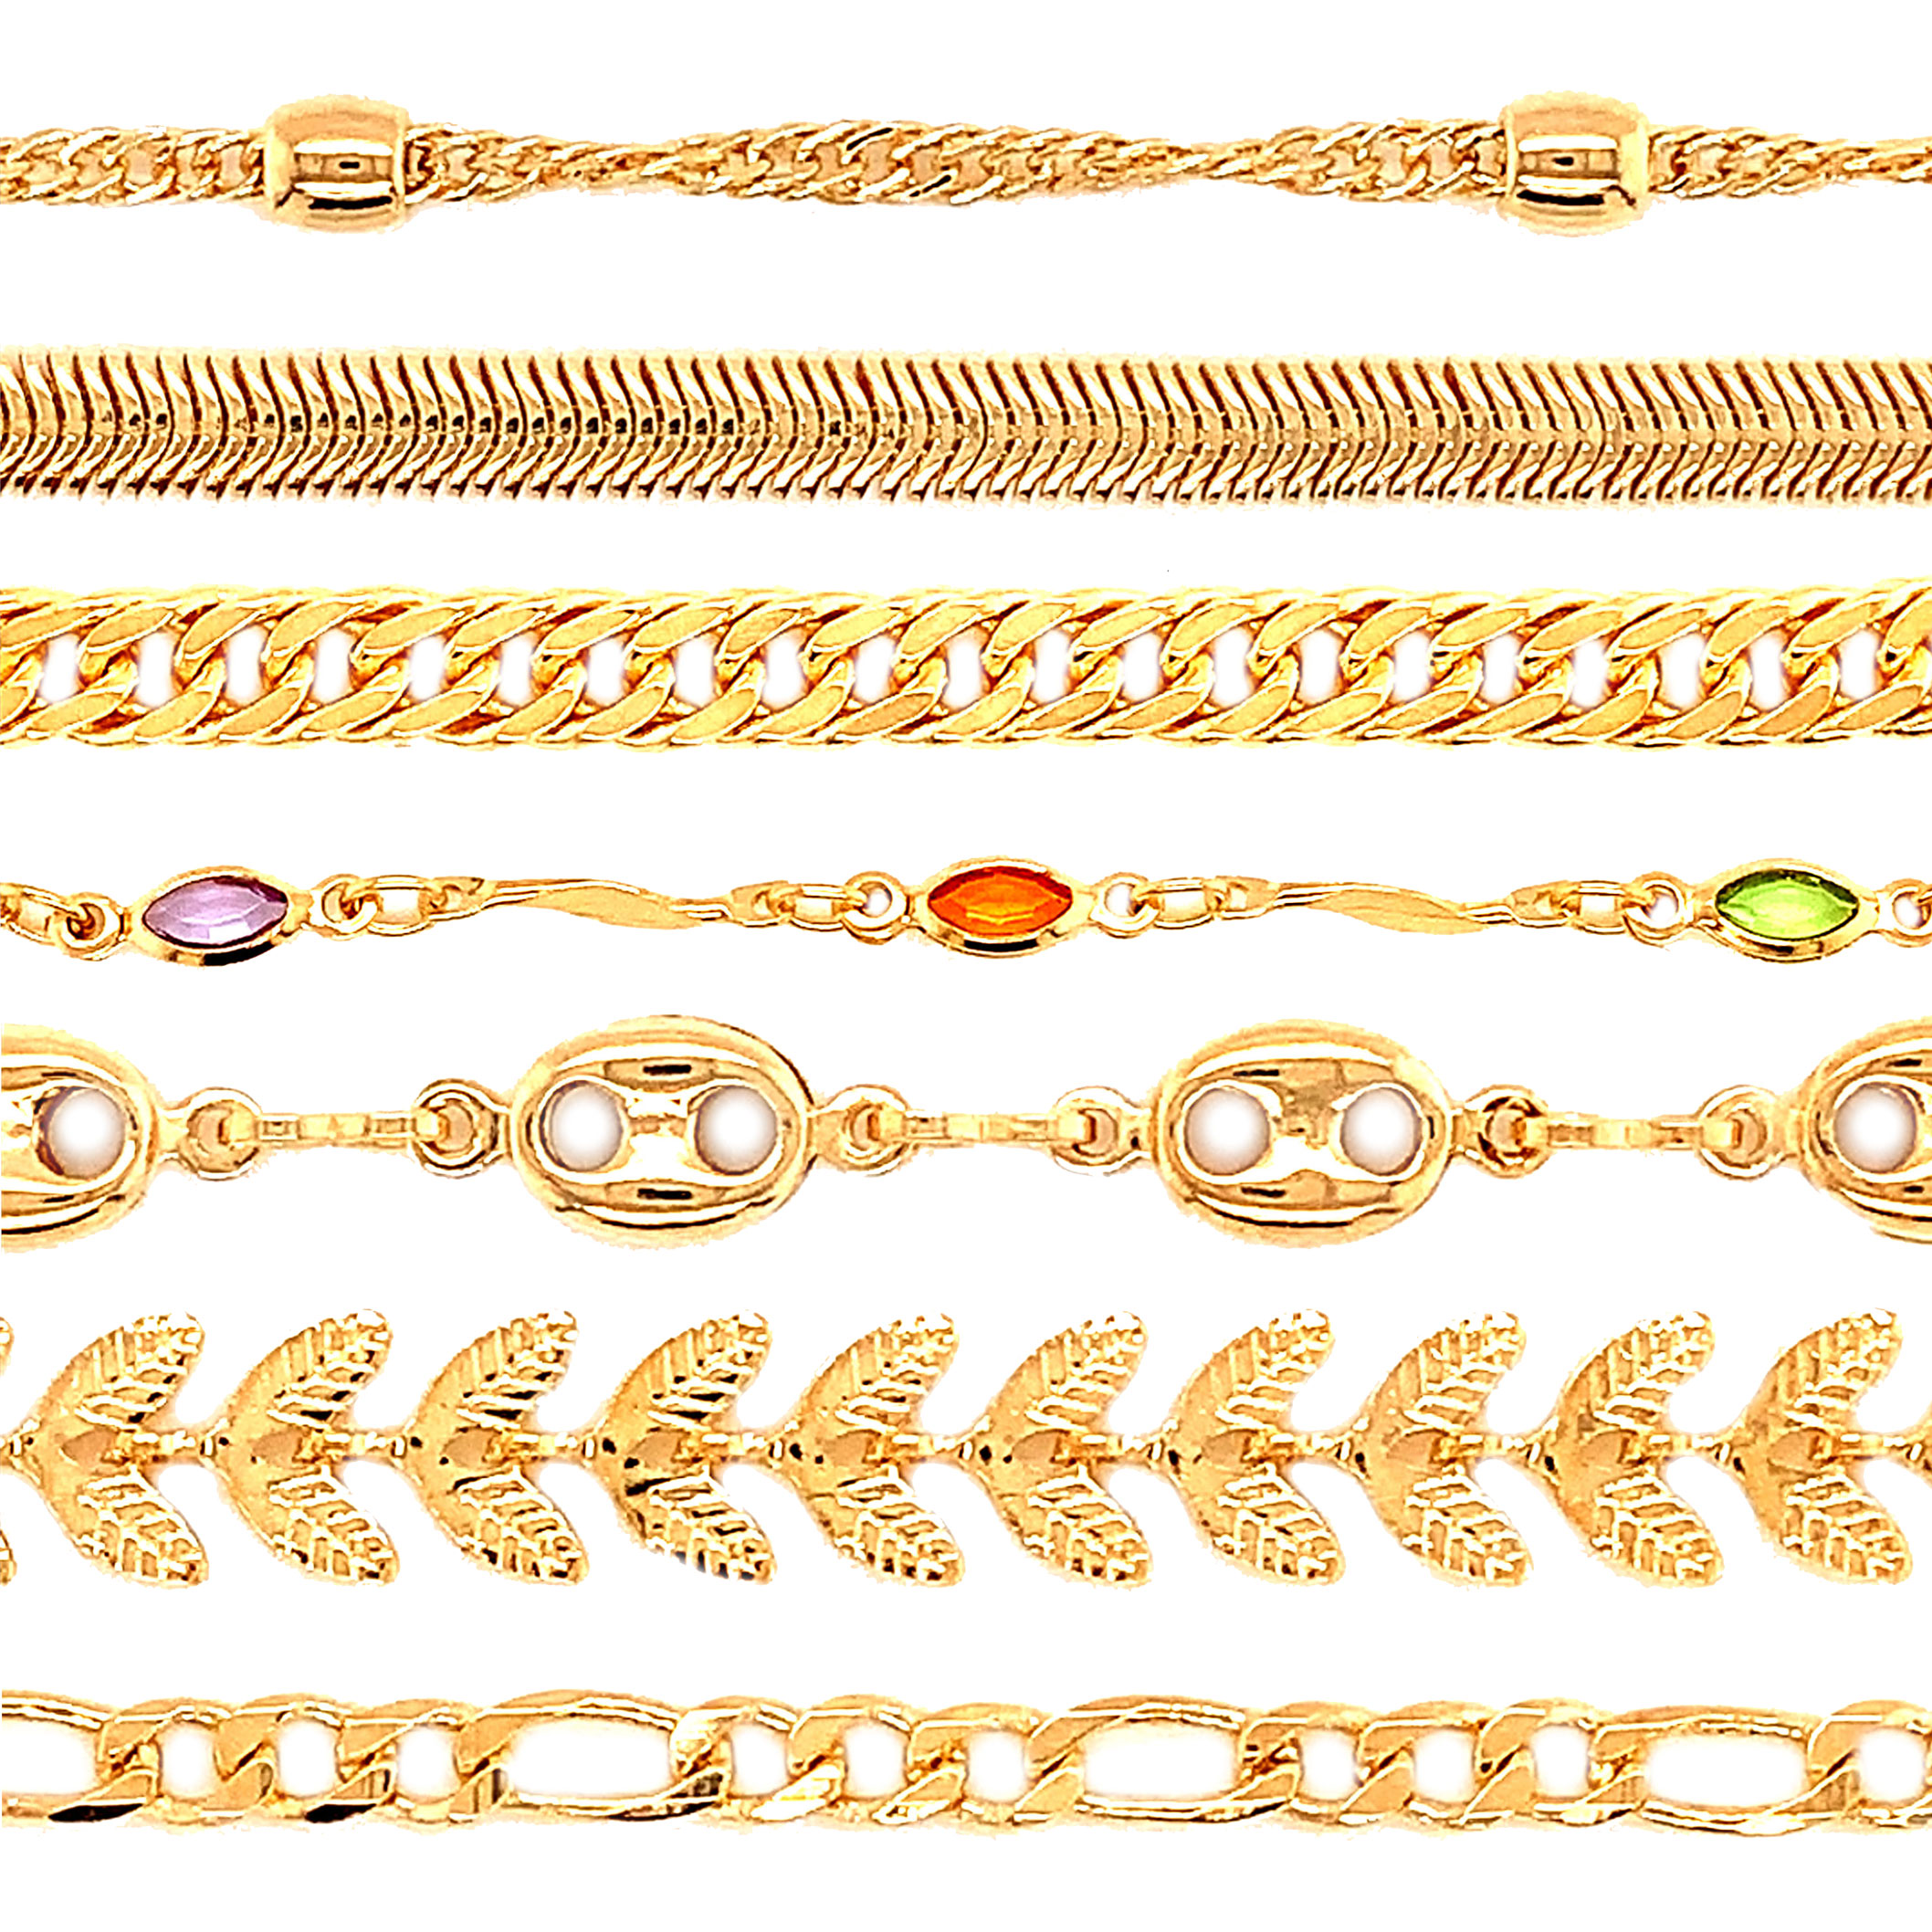 CHAIN ANKLETS